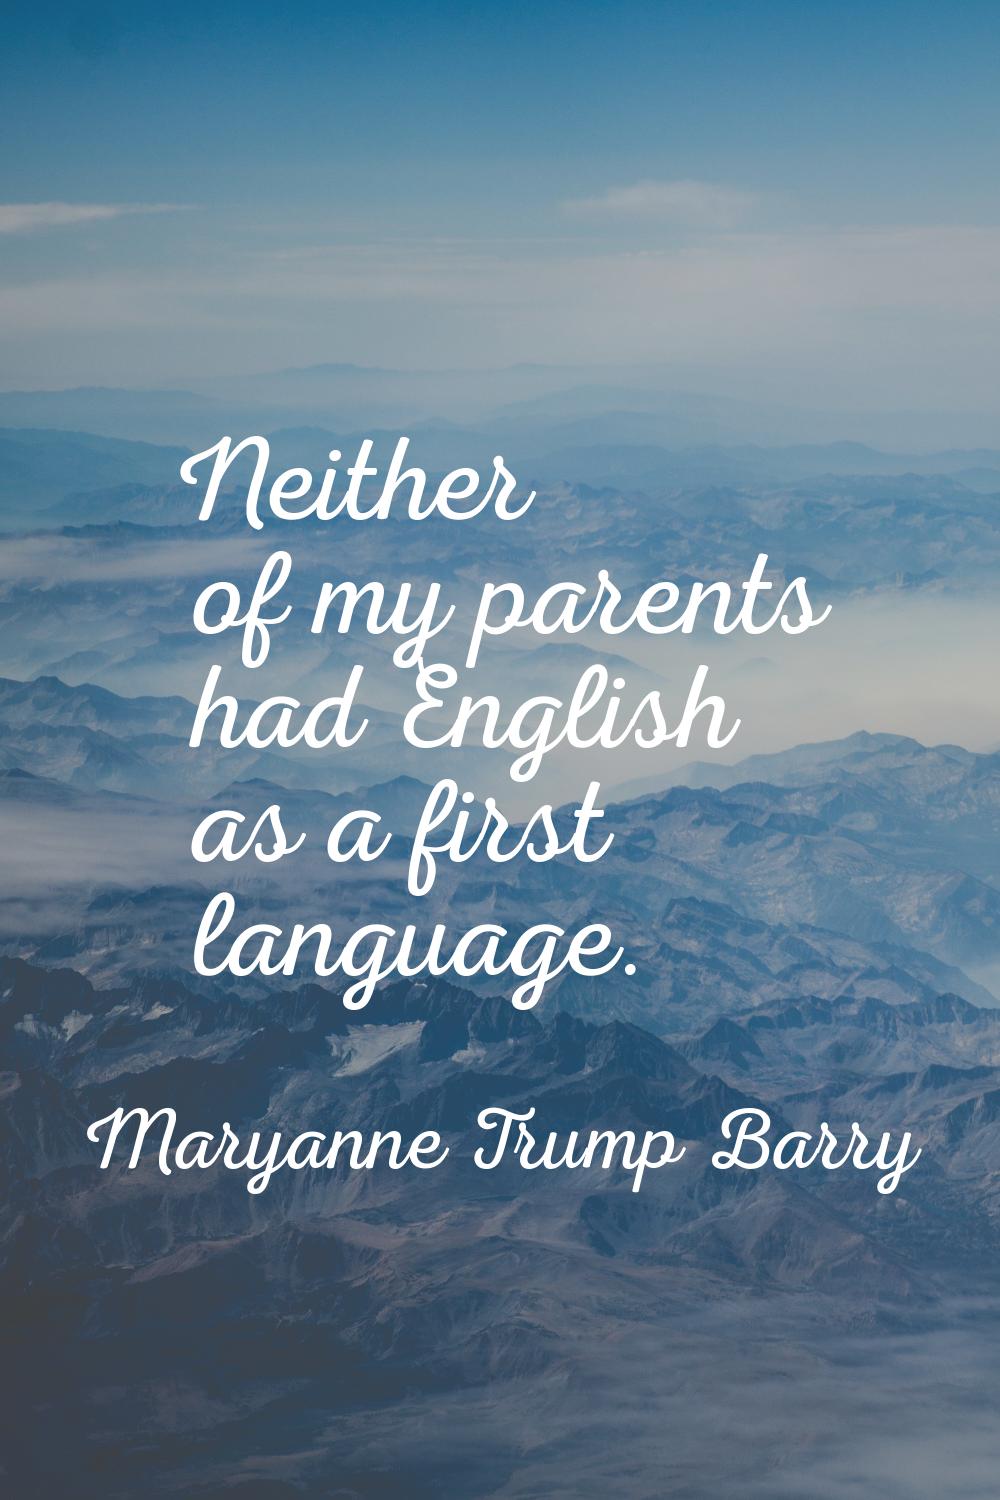 Neither of my parents had English as a first language.